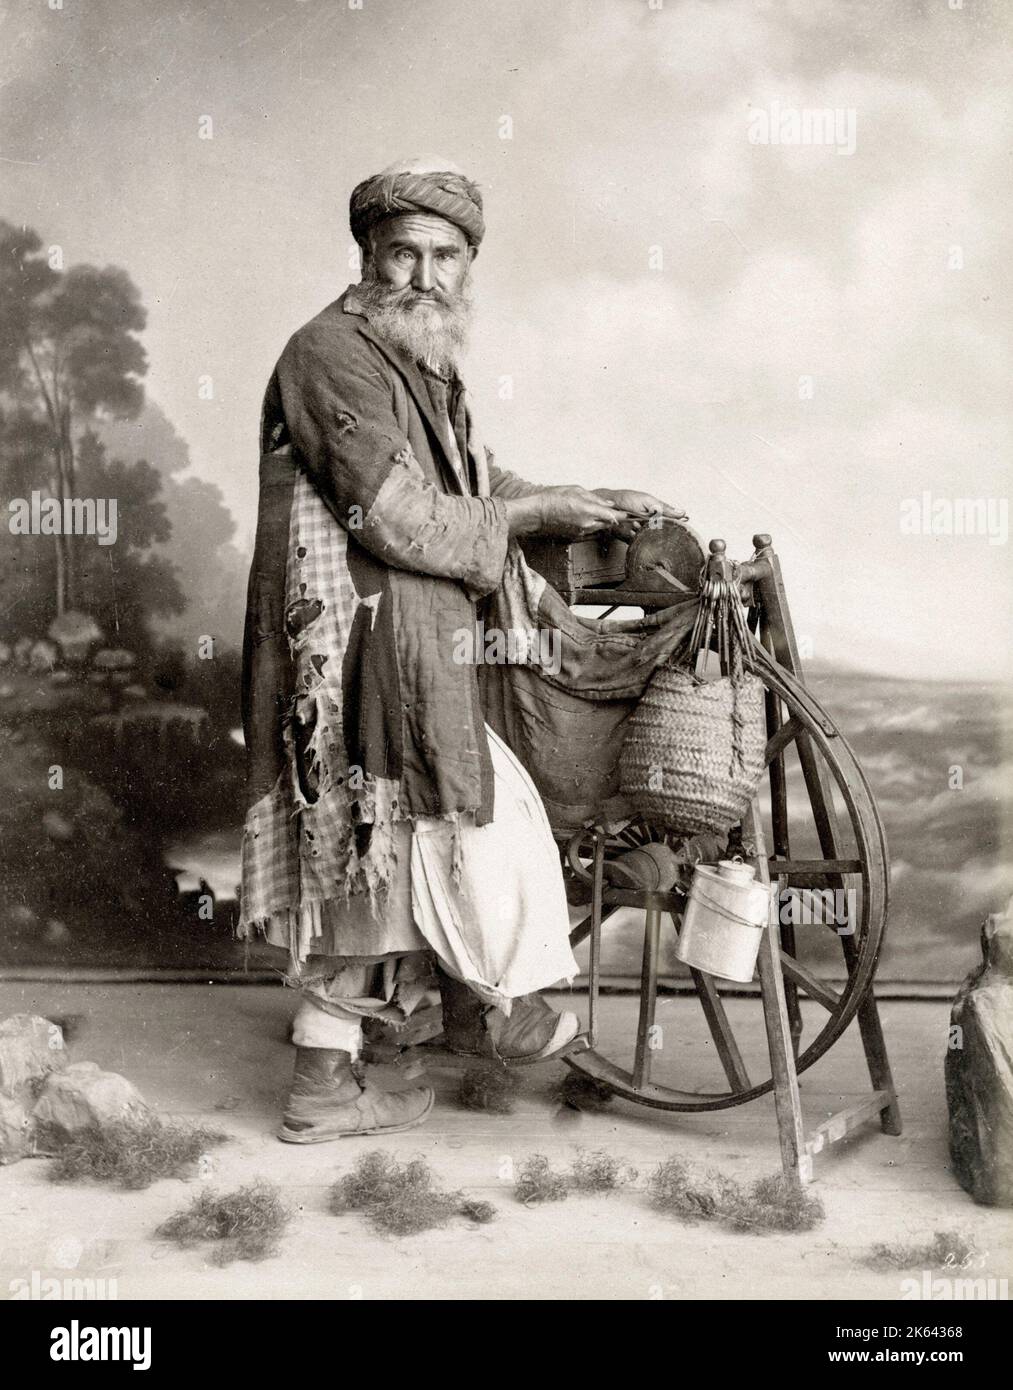 19th century vintage photograph: Bearded Egyptian man sharpening knives on a grind stone Stock Photo